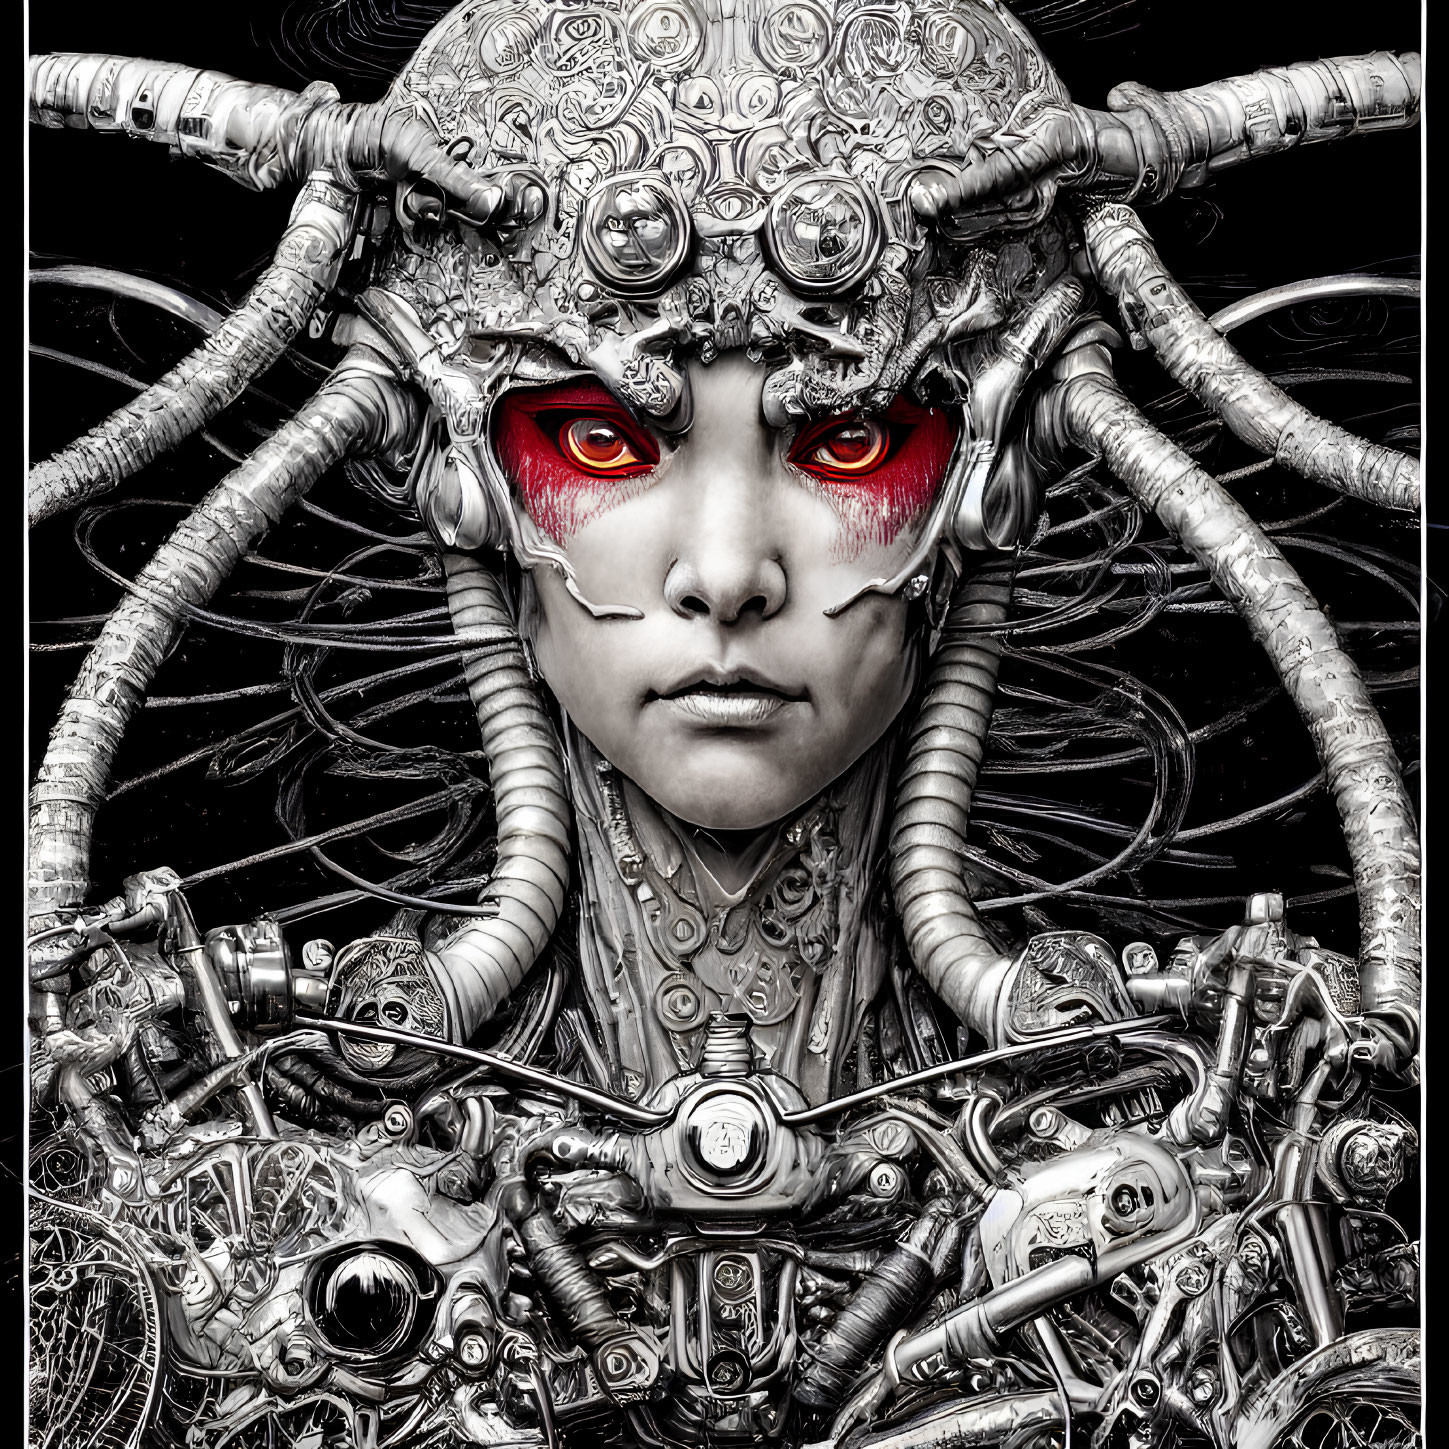 Detailed Cyborg with Red Eyes and Mechanical Parts